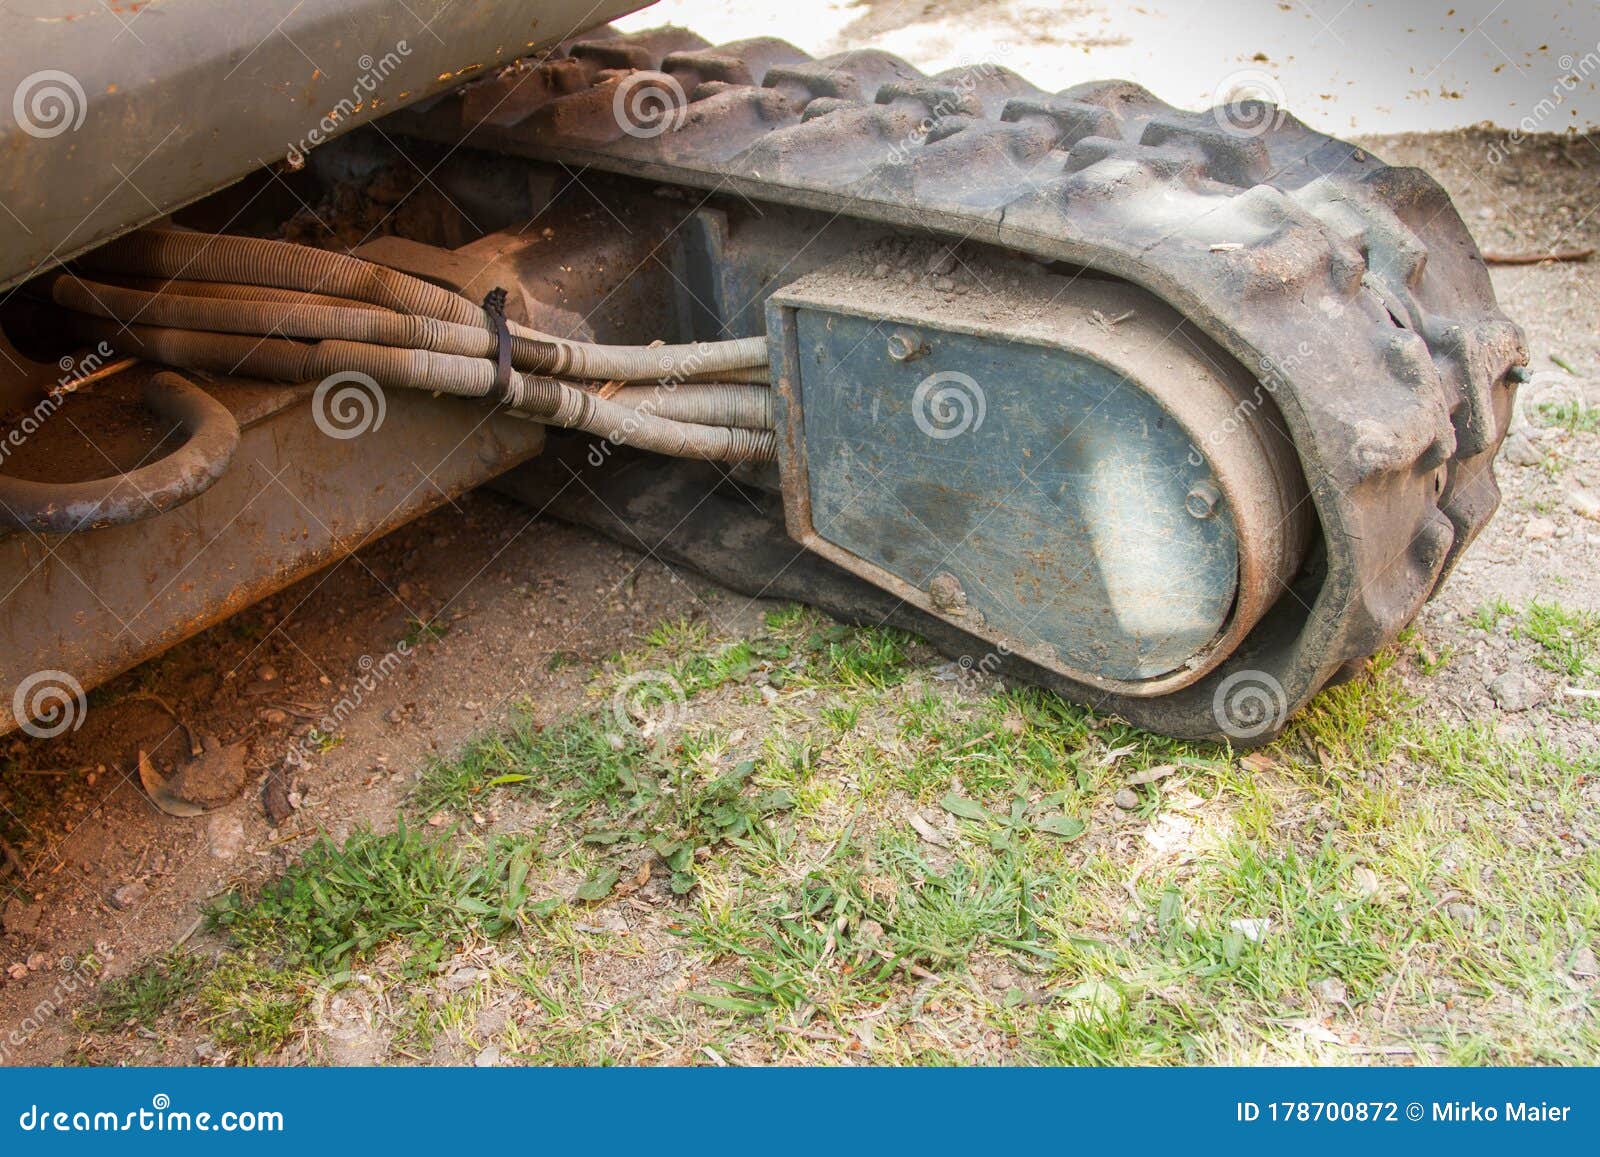 details of crawler excavator such as the controls the cloches the bucket the hydraulic pumps the tracks